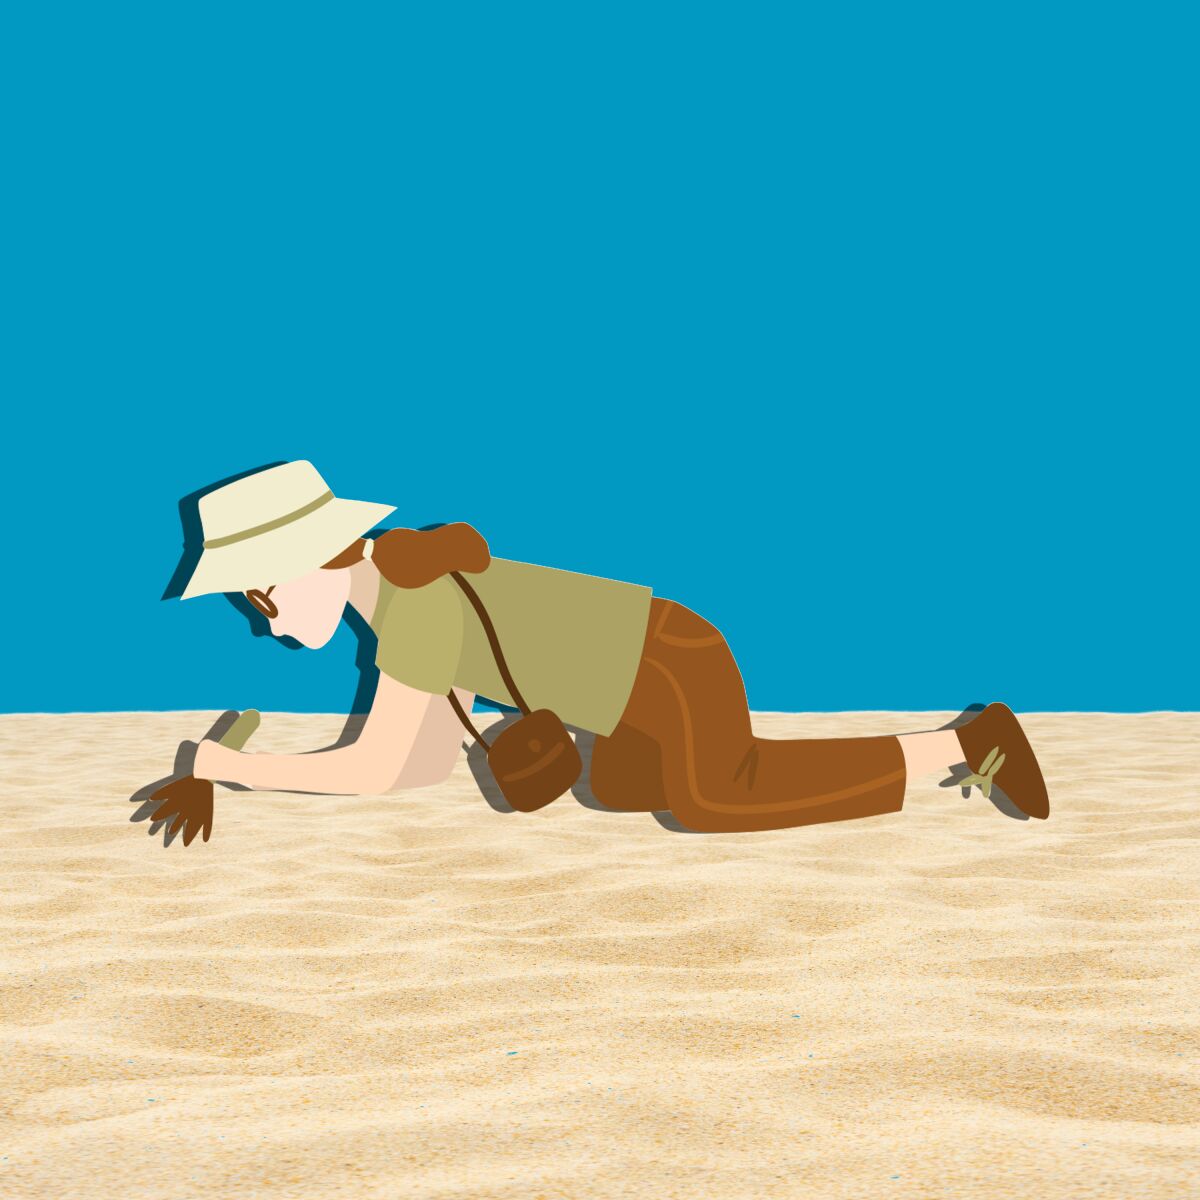 Illustration of a woman on her knees brushing away sand.